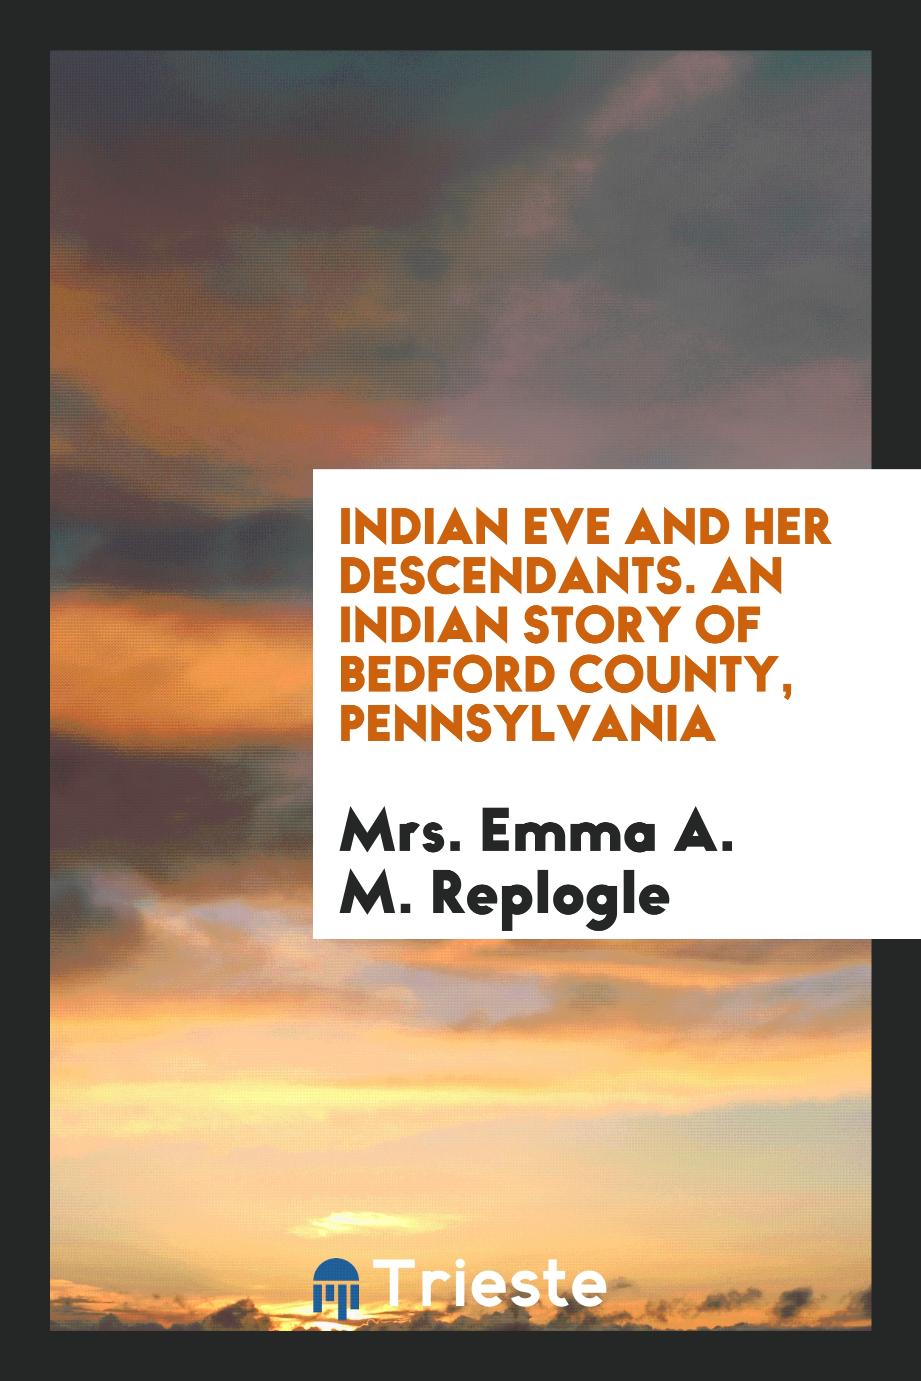 Indian Eve and Her Descendants. An Indian Story of Bedford County, Pennsylvania